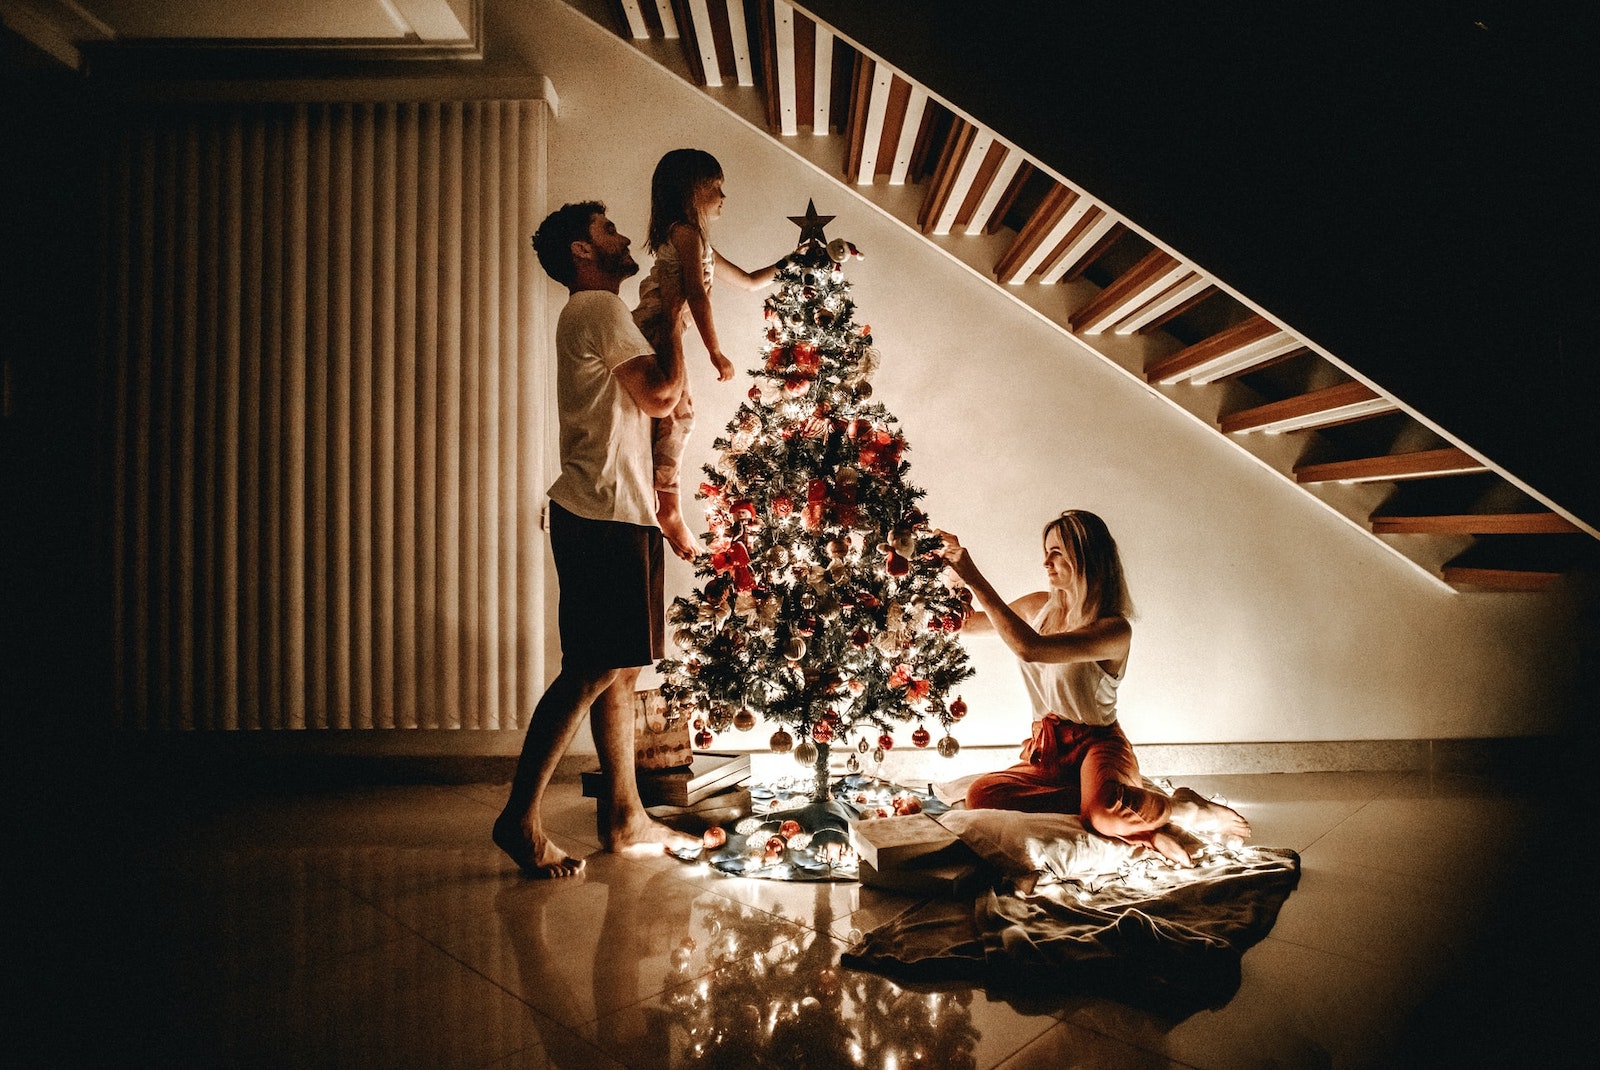  A Zero-Waste Christmas Guide for a More Sustainable Holiday